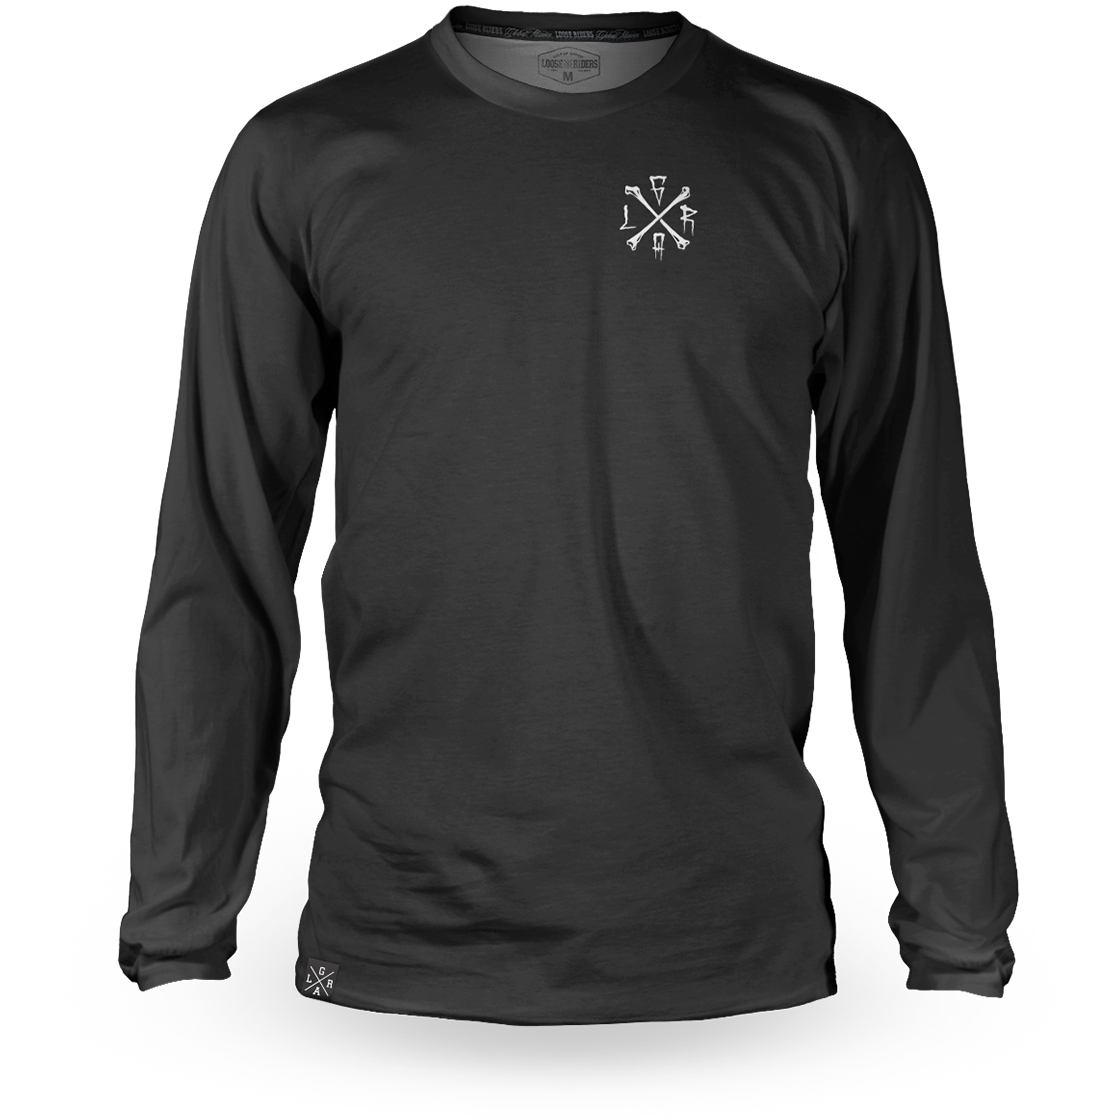 Image of Loose Riders Technical Long Sleeve Jersey - Skully